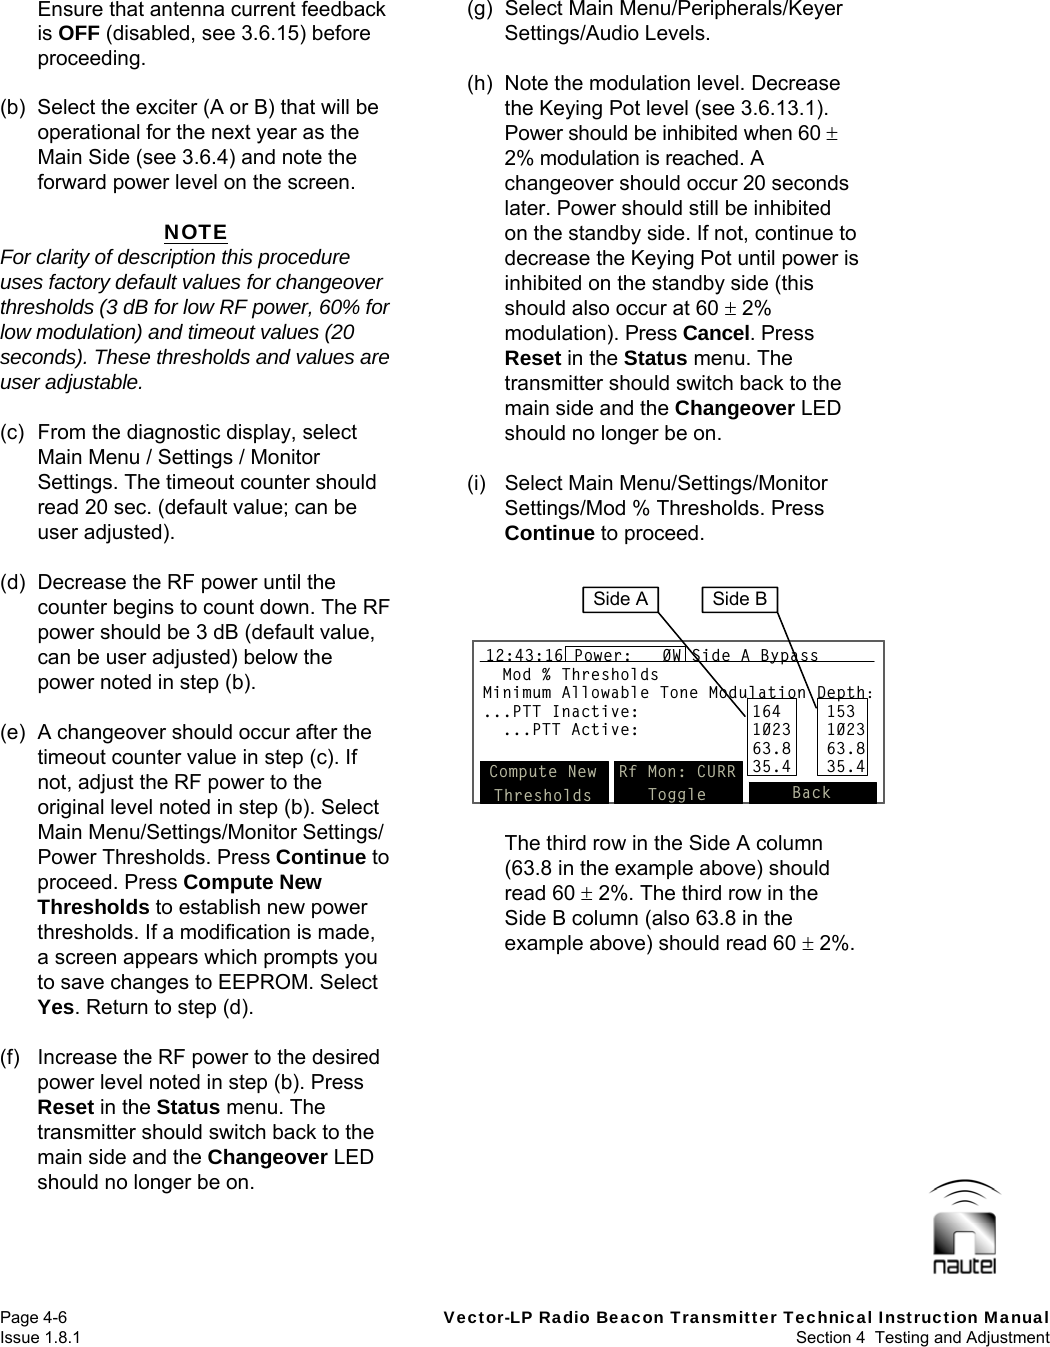   Page 4-6  Vector-LP Radio Beacon Transmitter Technical Instruction Manual Issue 1.8.1  Section 4  Testing and Adjustment Ensure that antenna current feedback is OFF (disabled, see 3.6.15) before proceeding.  (b)  Select the exciter (A or B) that will be operational for the next year as the Main Side (see 3.6.4) and note the forward power level on the screen.  NOTE For clarity of description this procedure uses factory default values for changeover thresholds (3 dB for low RF power, 60% for low modulation) and timeout values (20 seconds). These thresholds and values are user adjustable.  (c)  From the diagnostic display, select Main Menu / Settings / Monitor Settings. The timeout counter should read 20 sec. (default value; can be user adjusted).  (d)  Decrease the RF power until the counter begins to count down. The RF power should be 3 dB (default value, can be user adjusted) below the power noted in step (b).  (e)  A changeover should occur after the timeout counter value in step (c). If not, adjust the RF power to the original level noted in step (b). Select Main Menu/Settings/Monitor Settings/ Power Thresholds. Press Continue to proceed. Press Compute New Thresholds to establish new power thresholds. If a modification is made, a screen appears which prompts you to save changes to EEPROM. Select Yes. Return to step (d).  (f)  Increase the RF power to the desired power level noted in step (b). Press Reset in the Status menu. The transmitter should switch back to the main side and the Changeover LED should no longer be on.  (g) Select Main Menu/Peripherals/Keyer Settings/Audio Levels.  (h)  Note the modulation level. Decrease the Keying Pot level (see 3.6.13.1). Power should be inhibited when 60  2% modulation is reached. A changeover should occur 20 seconds later. Power should still be inhibited on the standby side. If not, continue to decrease the Keying Pot until power is inhibited on the standby side (this should also occur at 60  2% modulation). Press Cancel. Press Reset in the Status menu. The transmitter should switch back to the main side and the Changeover LED should no longer be on.  (i) Select Main Menu/Settings/Monitor Settings/Mod % Thresholds. Press Continue to proceed.   The third row in the Side A column (63.8 in the example above) should read 60  2%. The third row in the Side B column (also 63.8 in the example above) should read 60  2%.  Mod % ThresholdsMinimum Allowable Tone Modulation Depth:...PTT Inactive: 164 153...PTT Active: 1023 102363.8 63.835.4 35.4Compute NewThresholdsRf Mon: CURRToggle Back12:43:16 Power:   0W Side A BypassMod % ThresholdsMinimum Allowable Tone Modulation Depth:...PTT Inactive: 164 153...PTT Active: 1023 102363.8 63.835.4 35.4Compute NewThresholdsRf Mon: CURRToggle Back12:43:16 Power:   0W Side A BypassMod % ThresholdsMinimum Allowable Tone Modulation Depth:...PTT Inactive: 164 153...PTT Active: 1023 102363.8 63.835.4 35.4Compute NewThresholdsRf Mon: CURRToggle Back12:43:16 Power:   0W Side A BypassSide A Side B